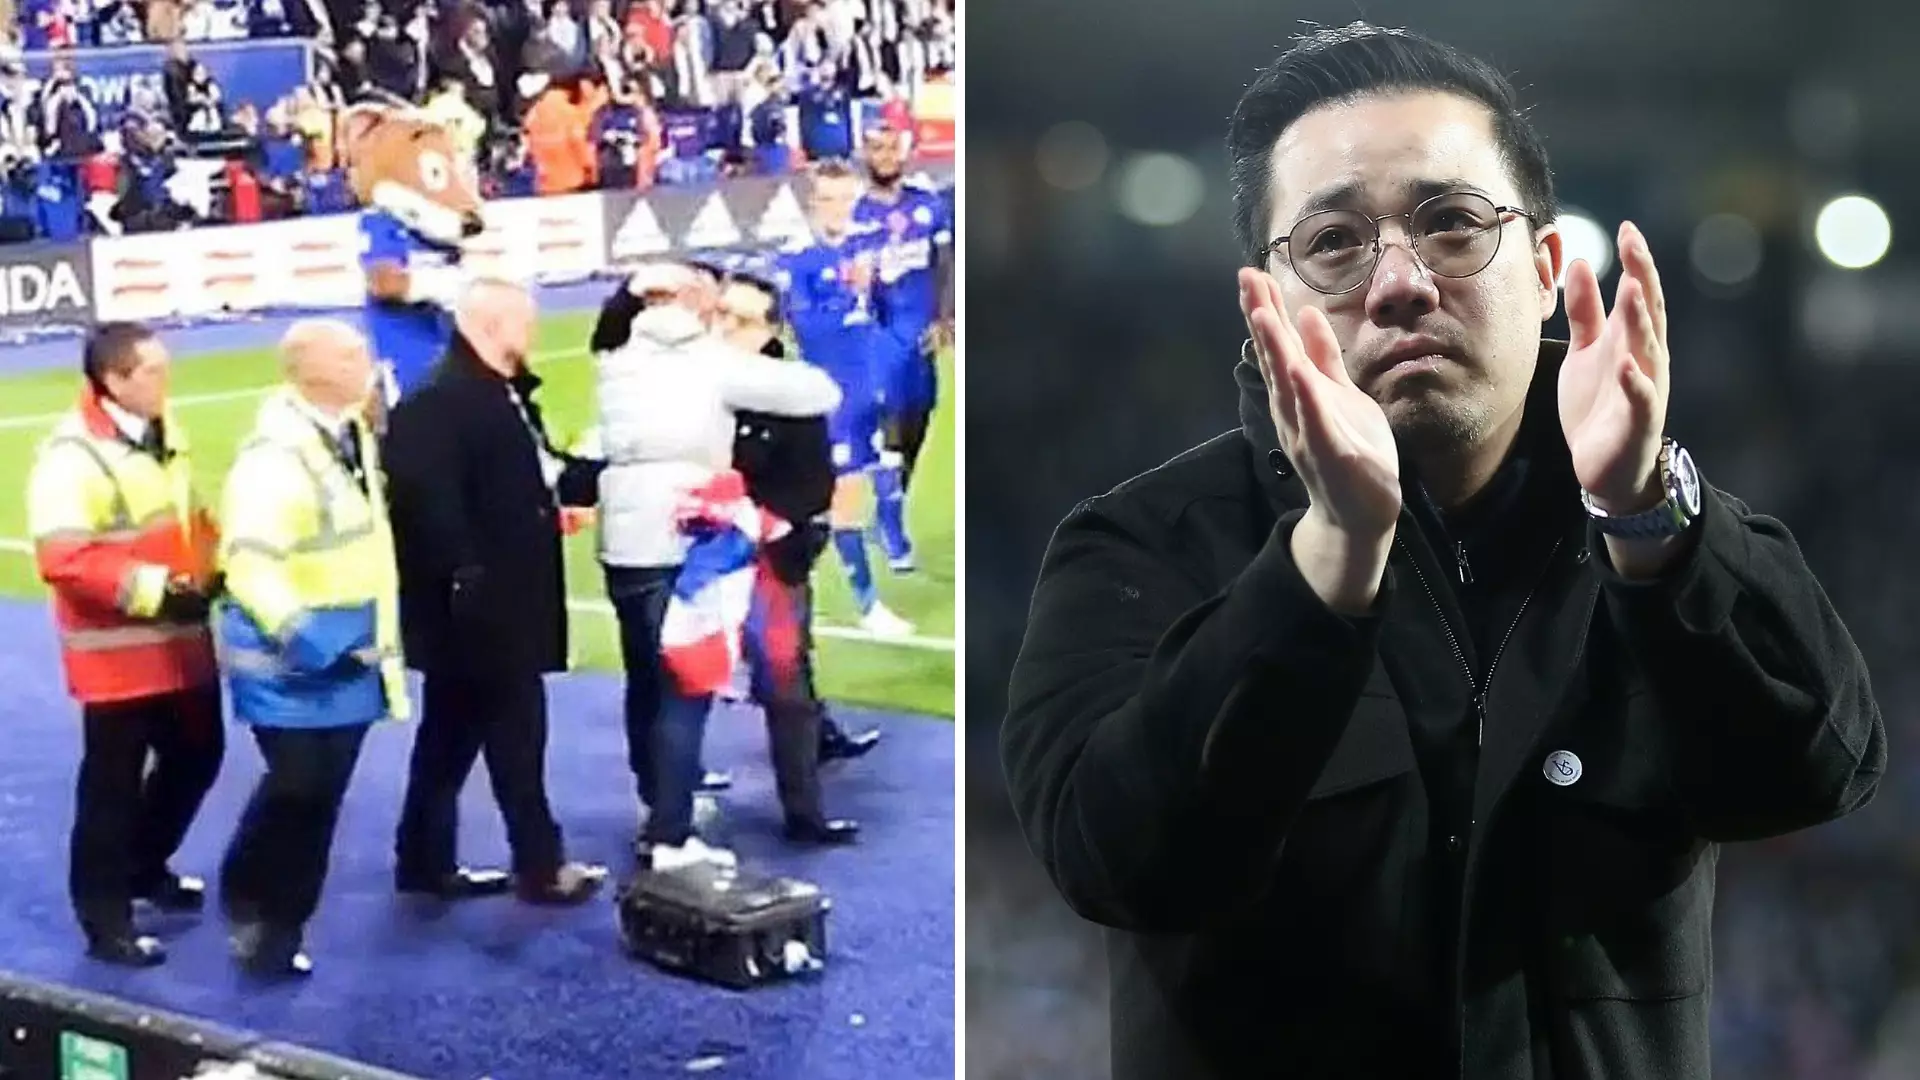 Leicester City Fan Banned After Invading Pitch To Hug Vichai Srivaddhanaprabha's Son